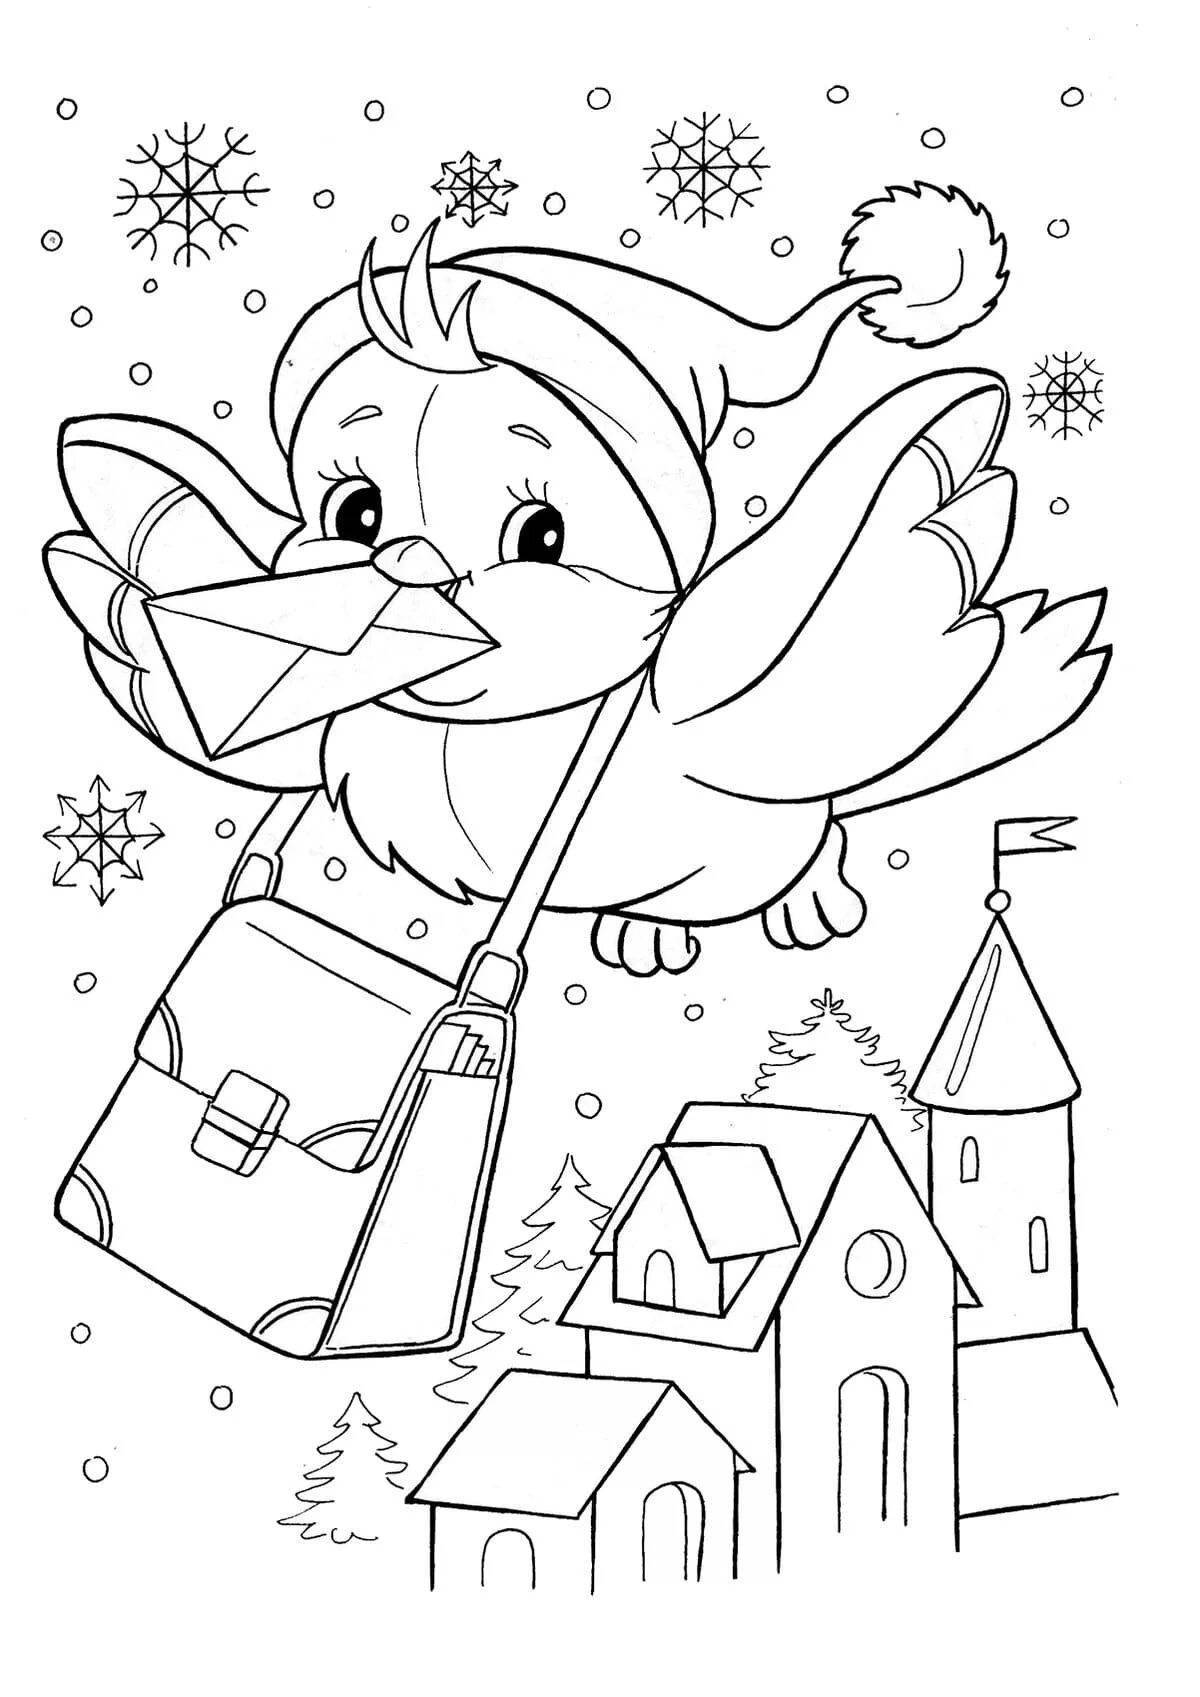 Colourful winter coloring book for children 8 years old